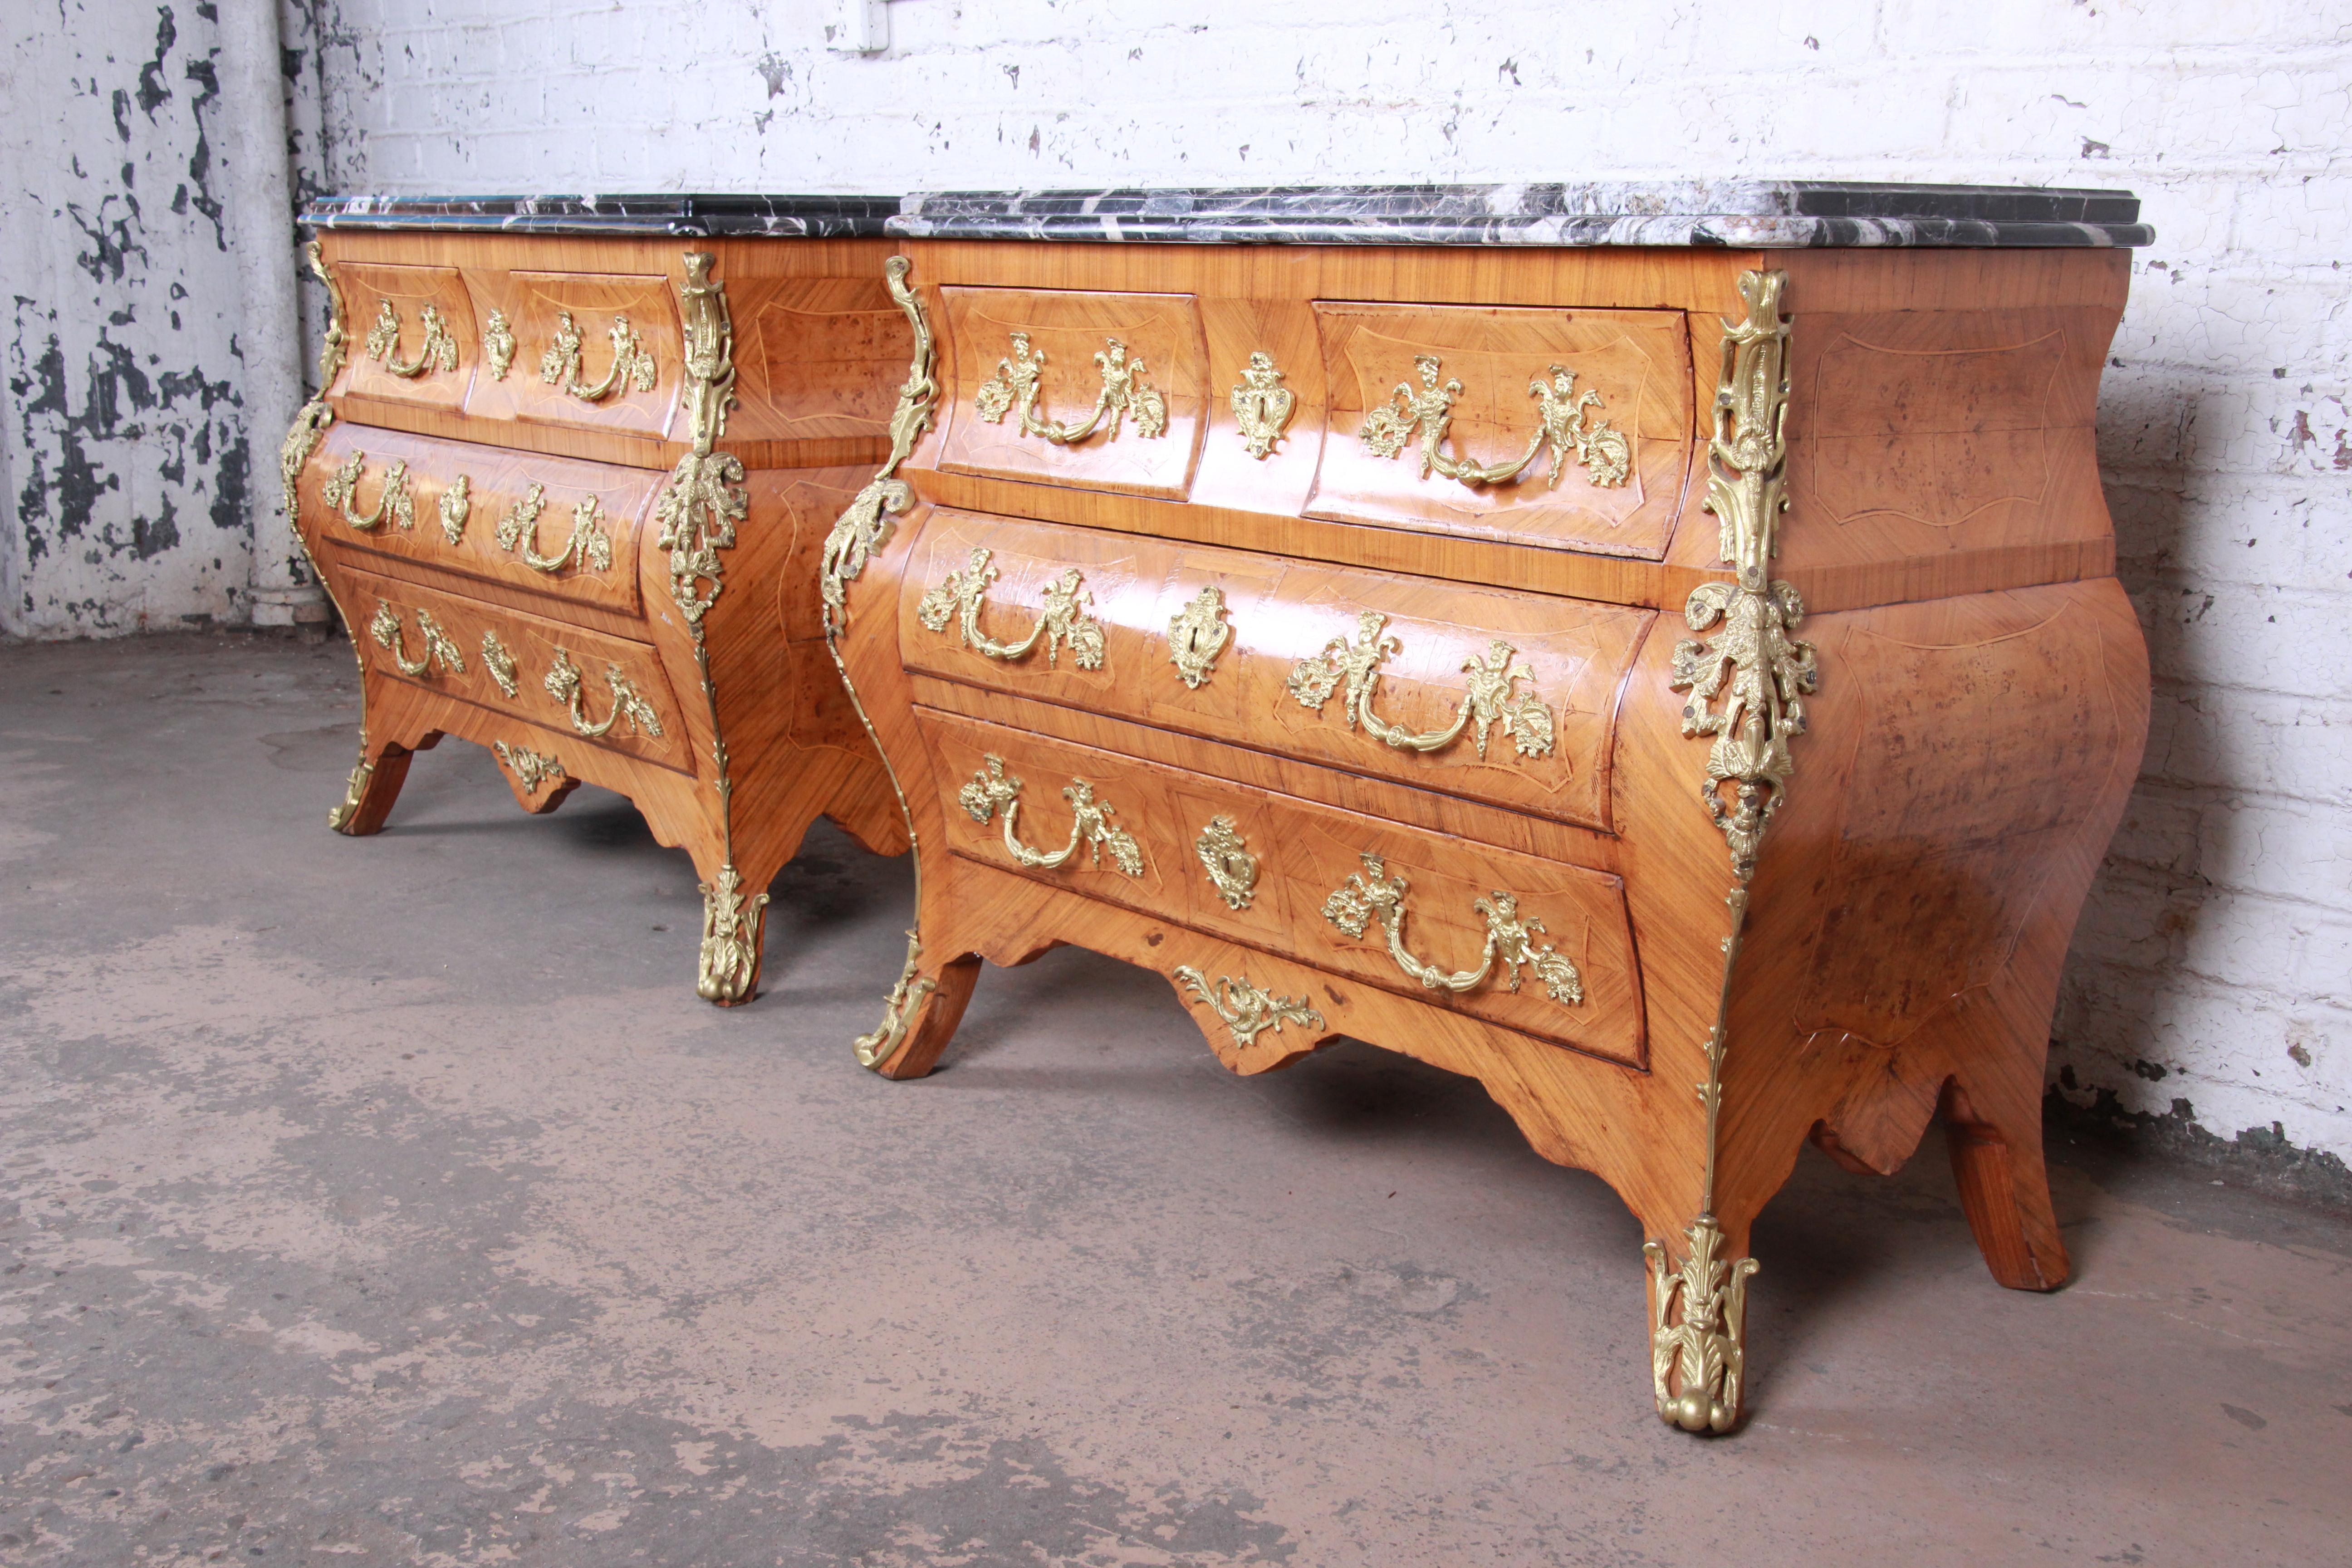 An exceptional pair of French Louis XV style mahogany bombay chests or commodes. The chests feature stunning mahogany wood grain with satinwood string inlays and inlaid burl wood. They have ornate mounted ormolu and incredible 1.75